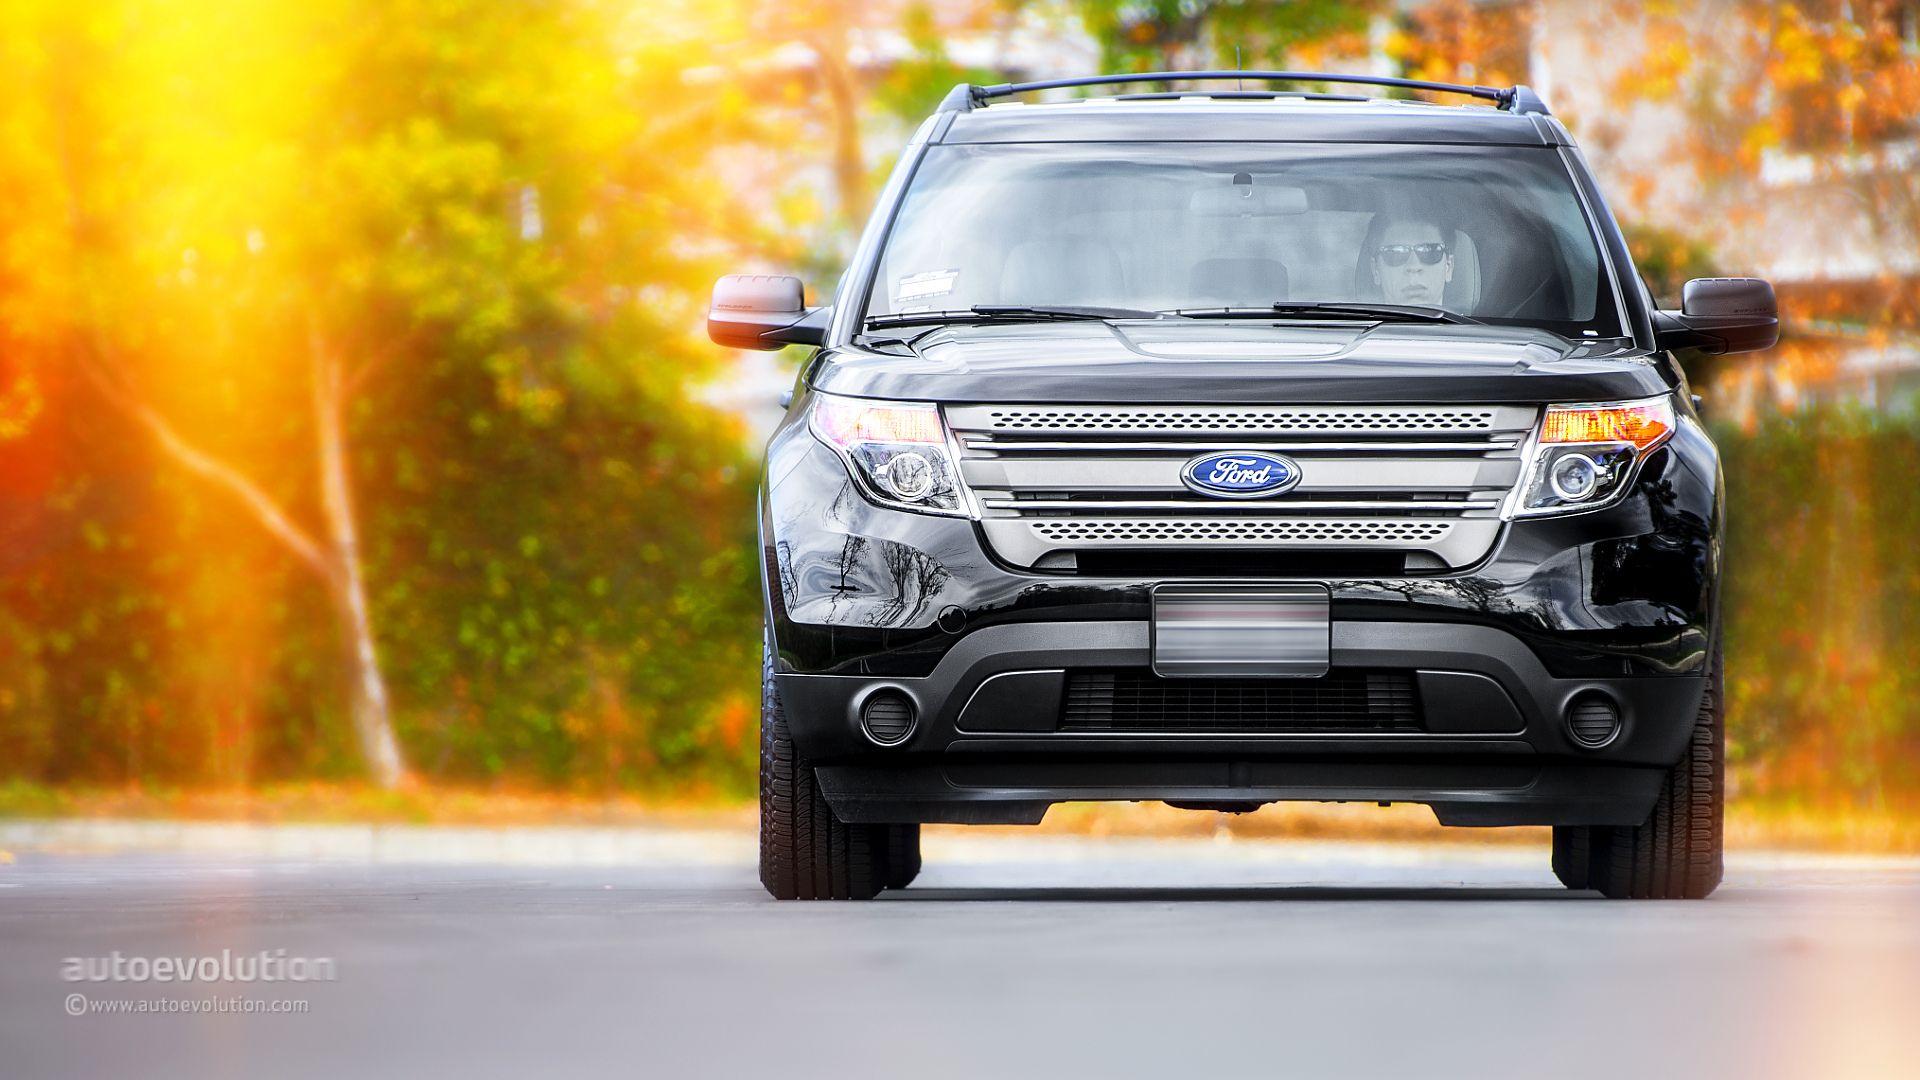 2011 Ford Explorer Wallpapers